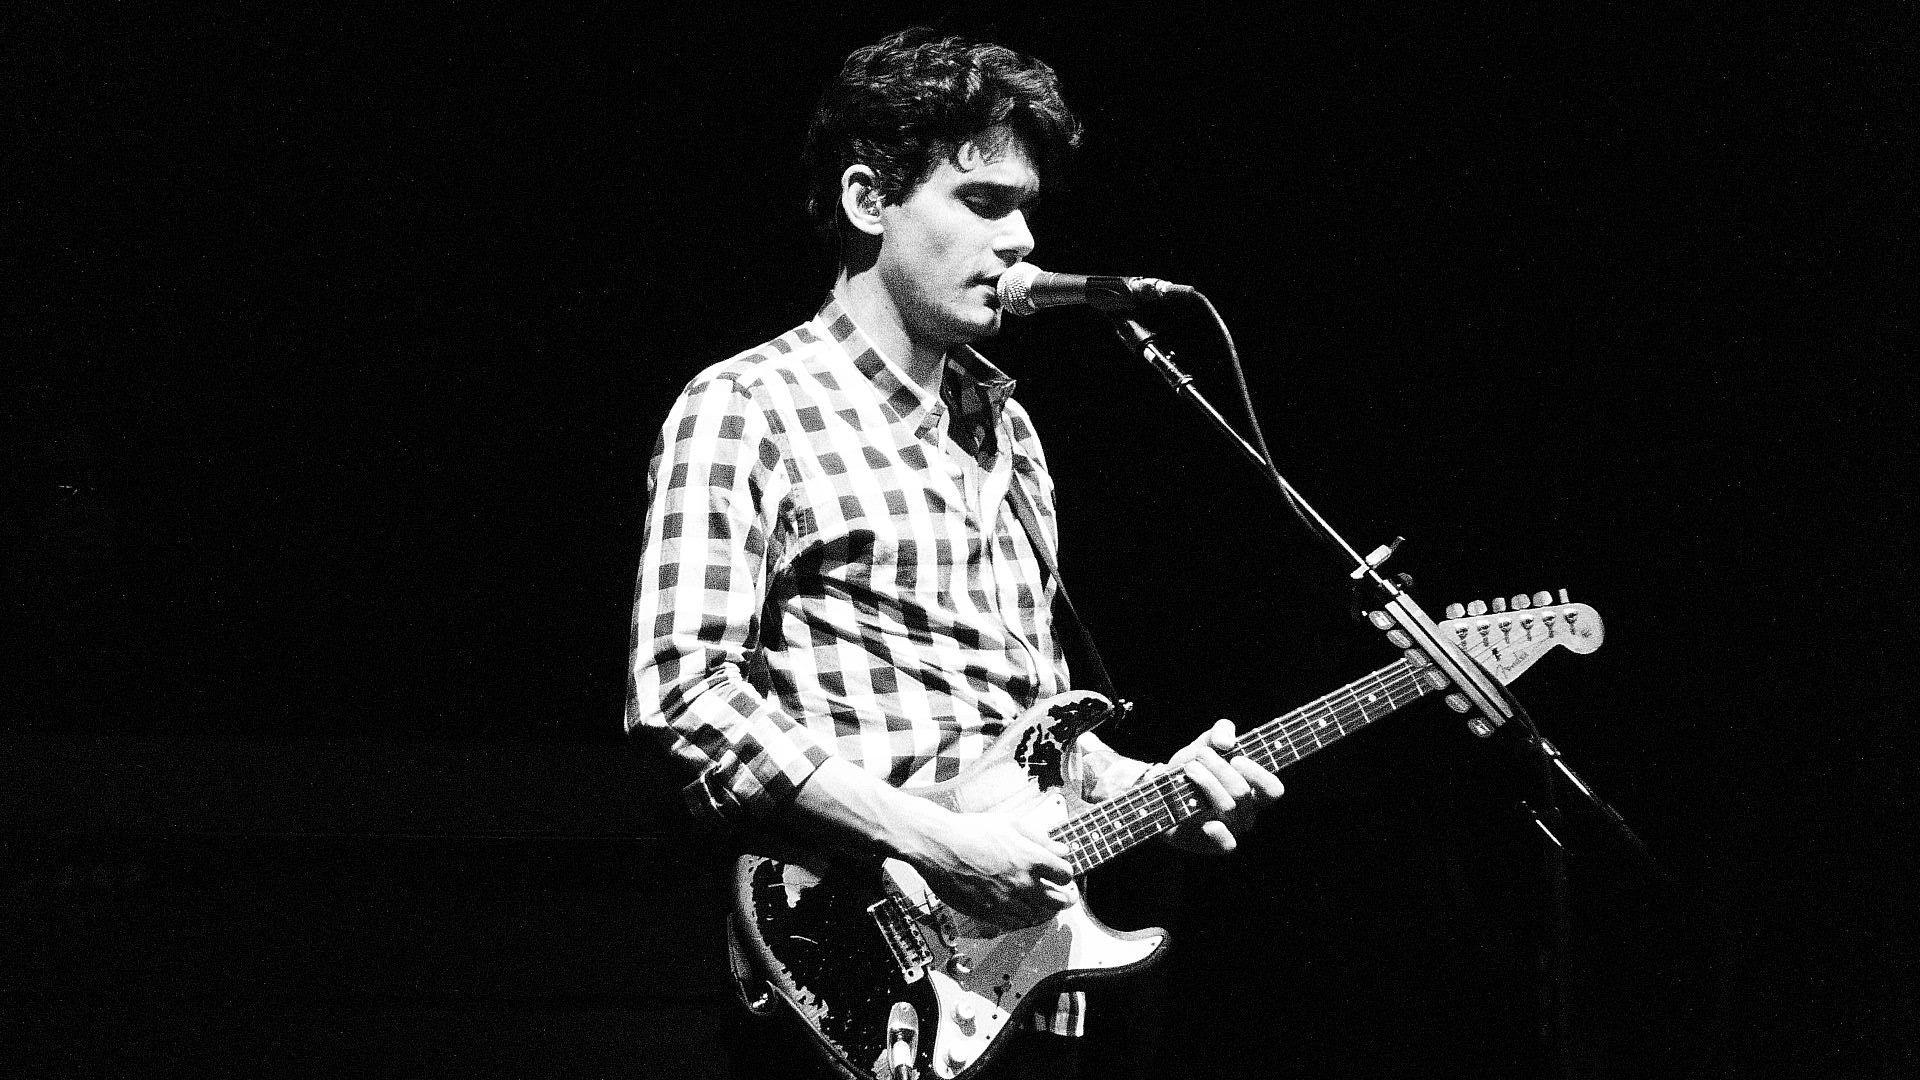 john mayer where the light is 1080p hd download free